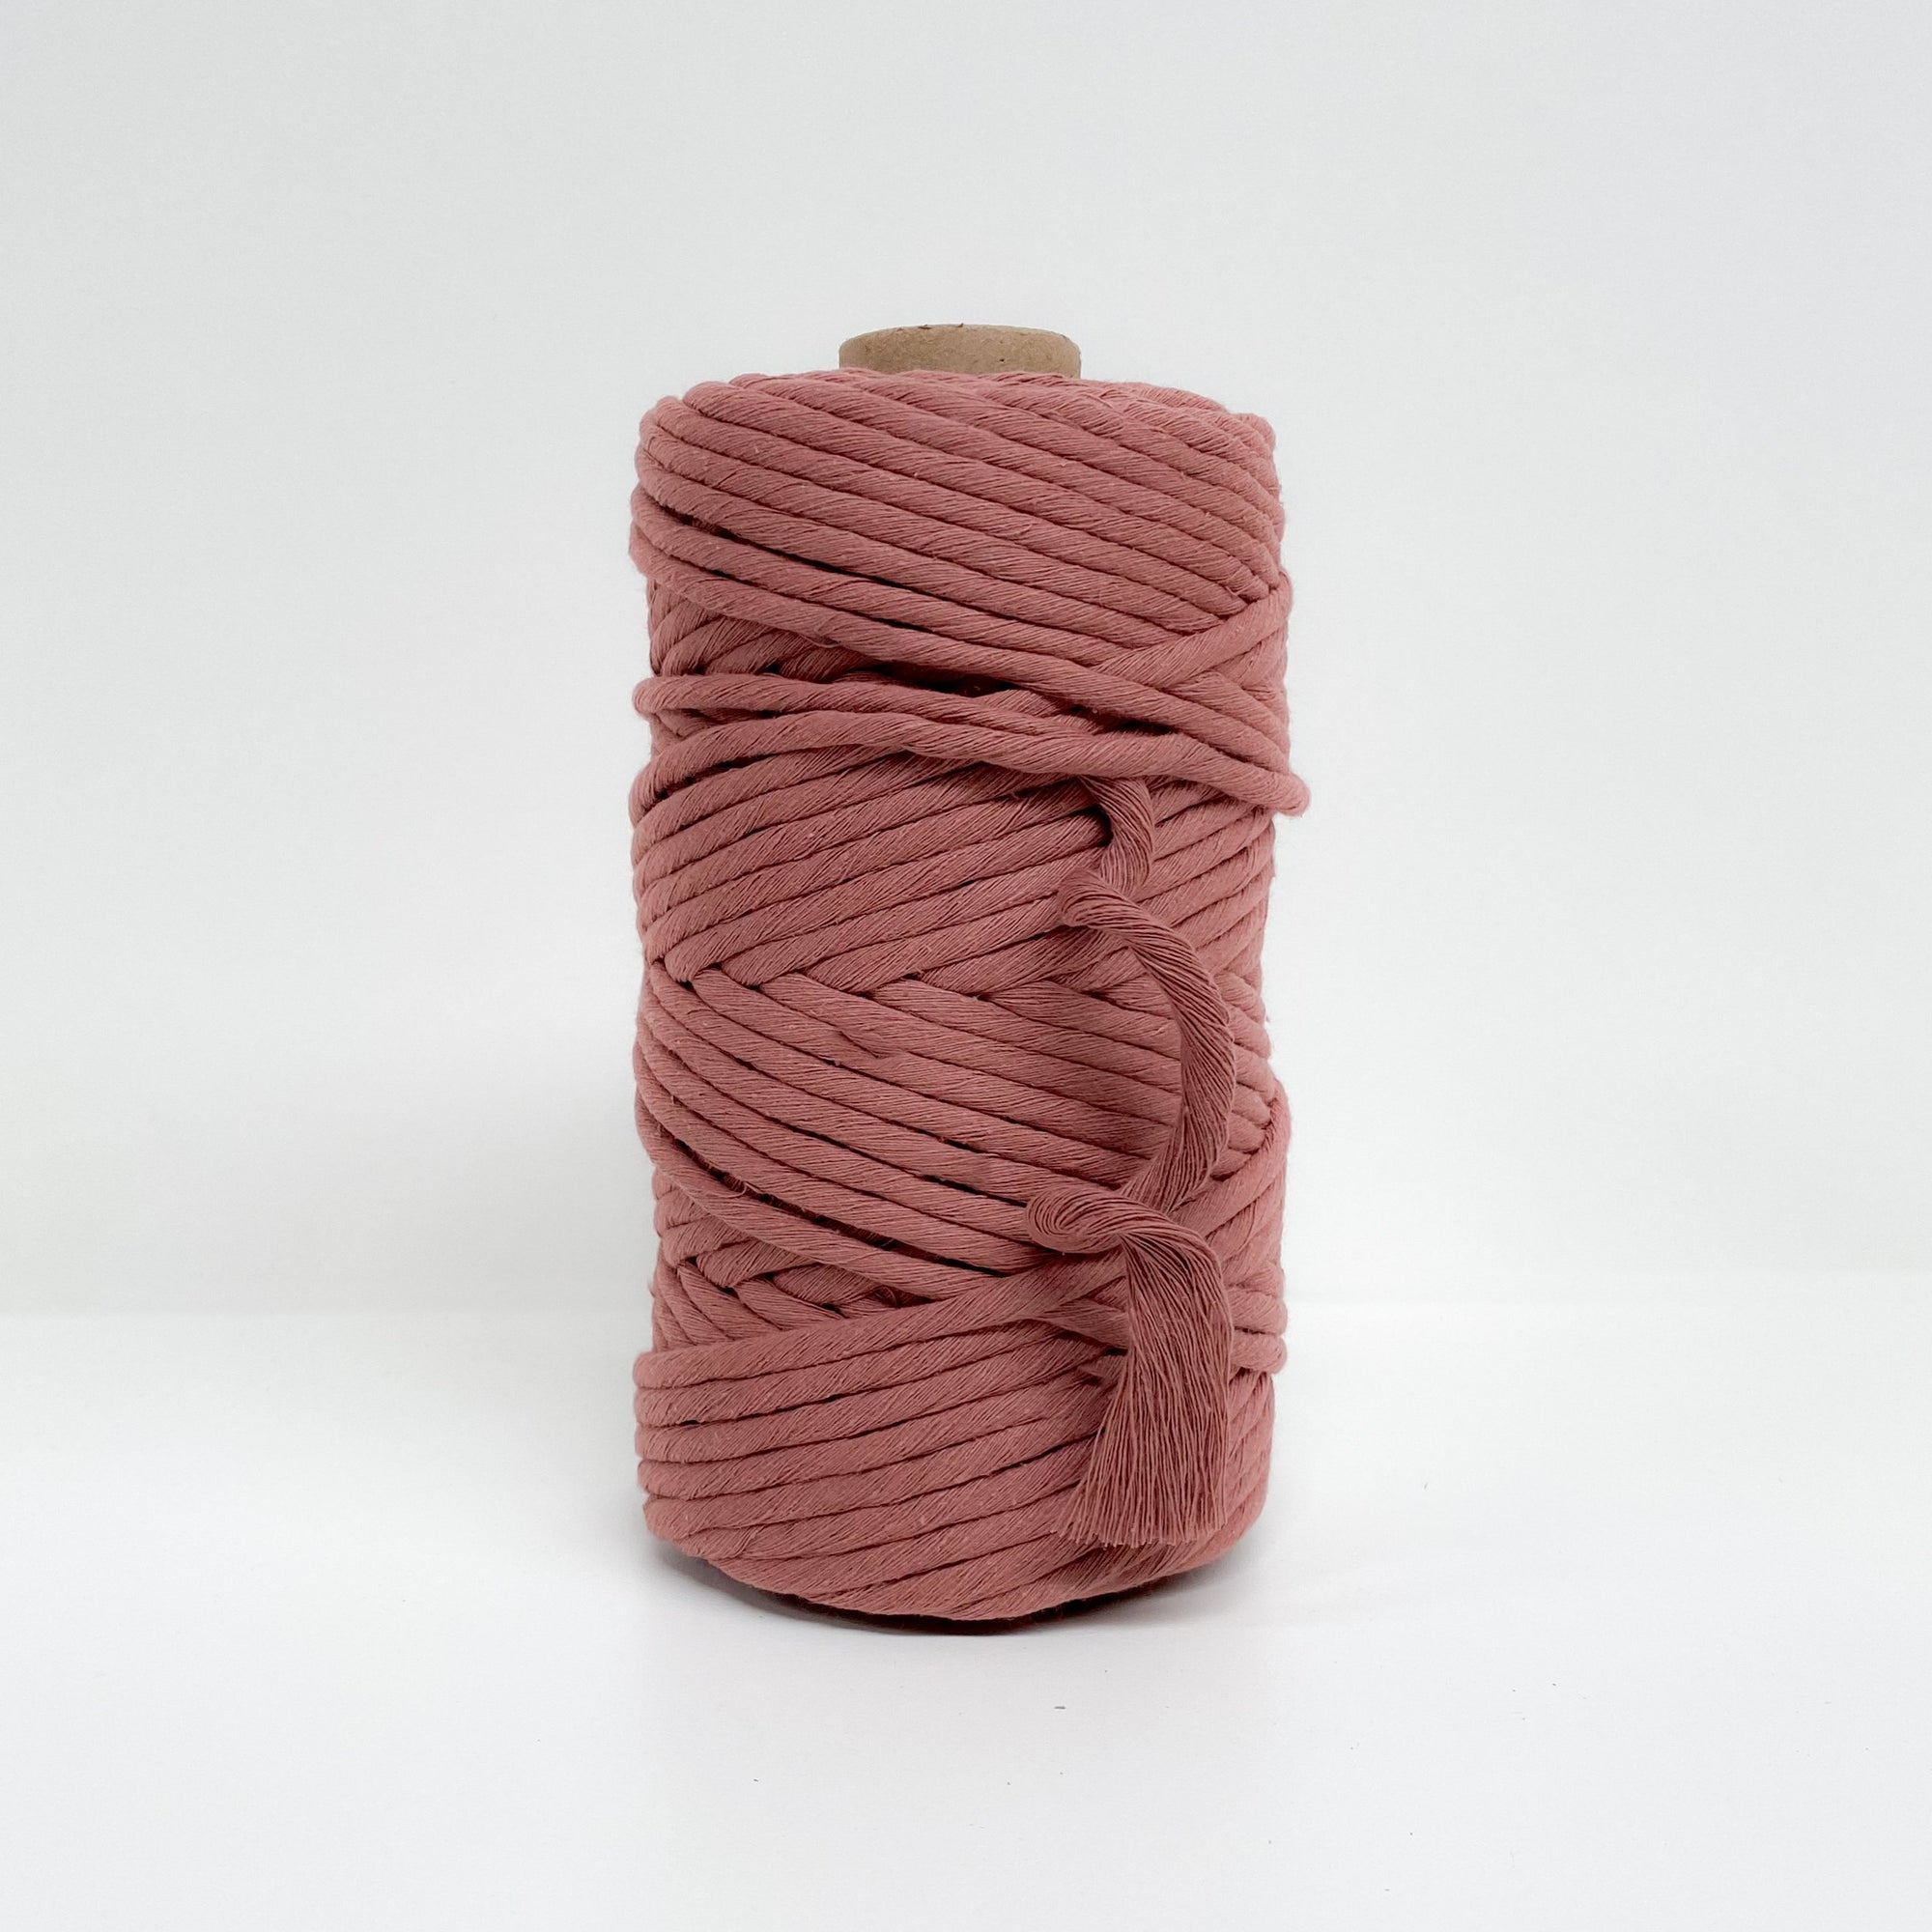 Mary Maker Studio Luxe Colour Cotton 8mm 1KG 8mm Recycled Luxe Macrame String // Rose Tea macrame cotton macrame rope macrame workshop macrame patterns macrame